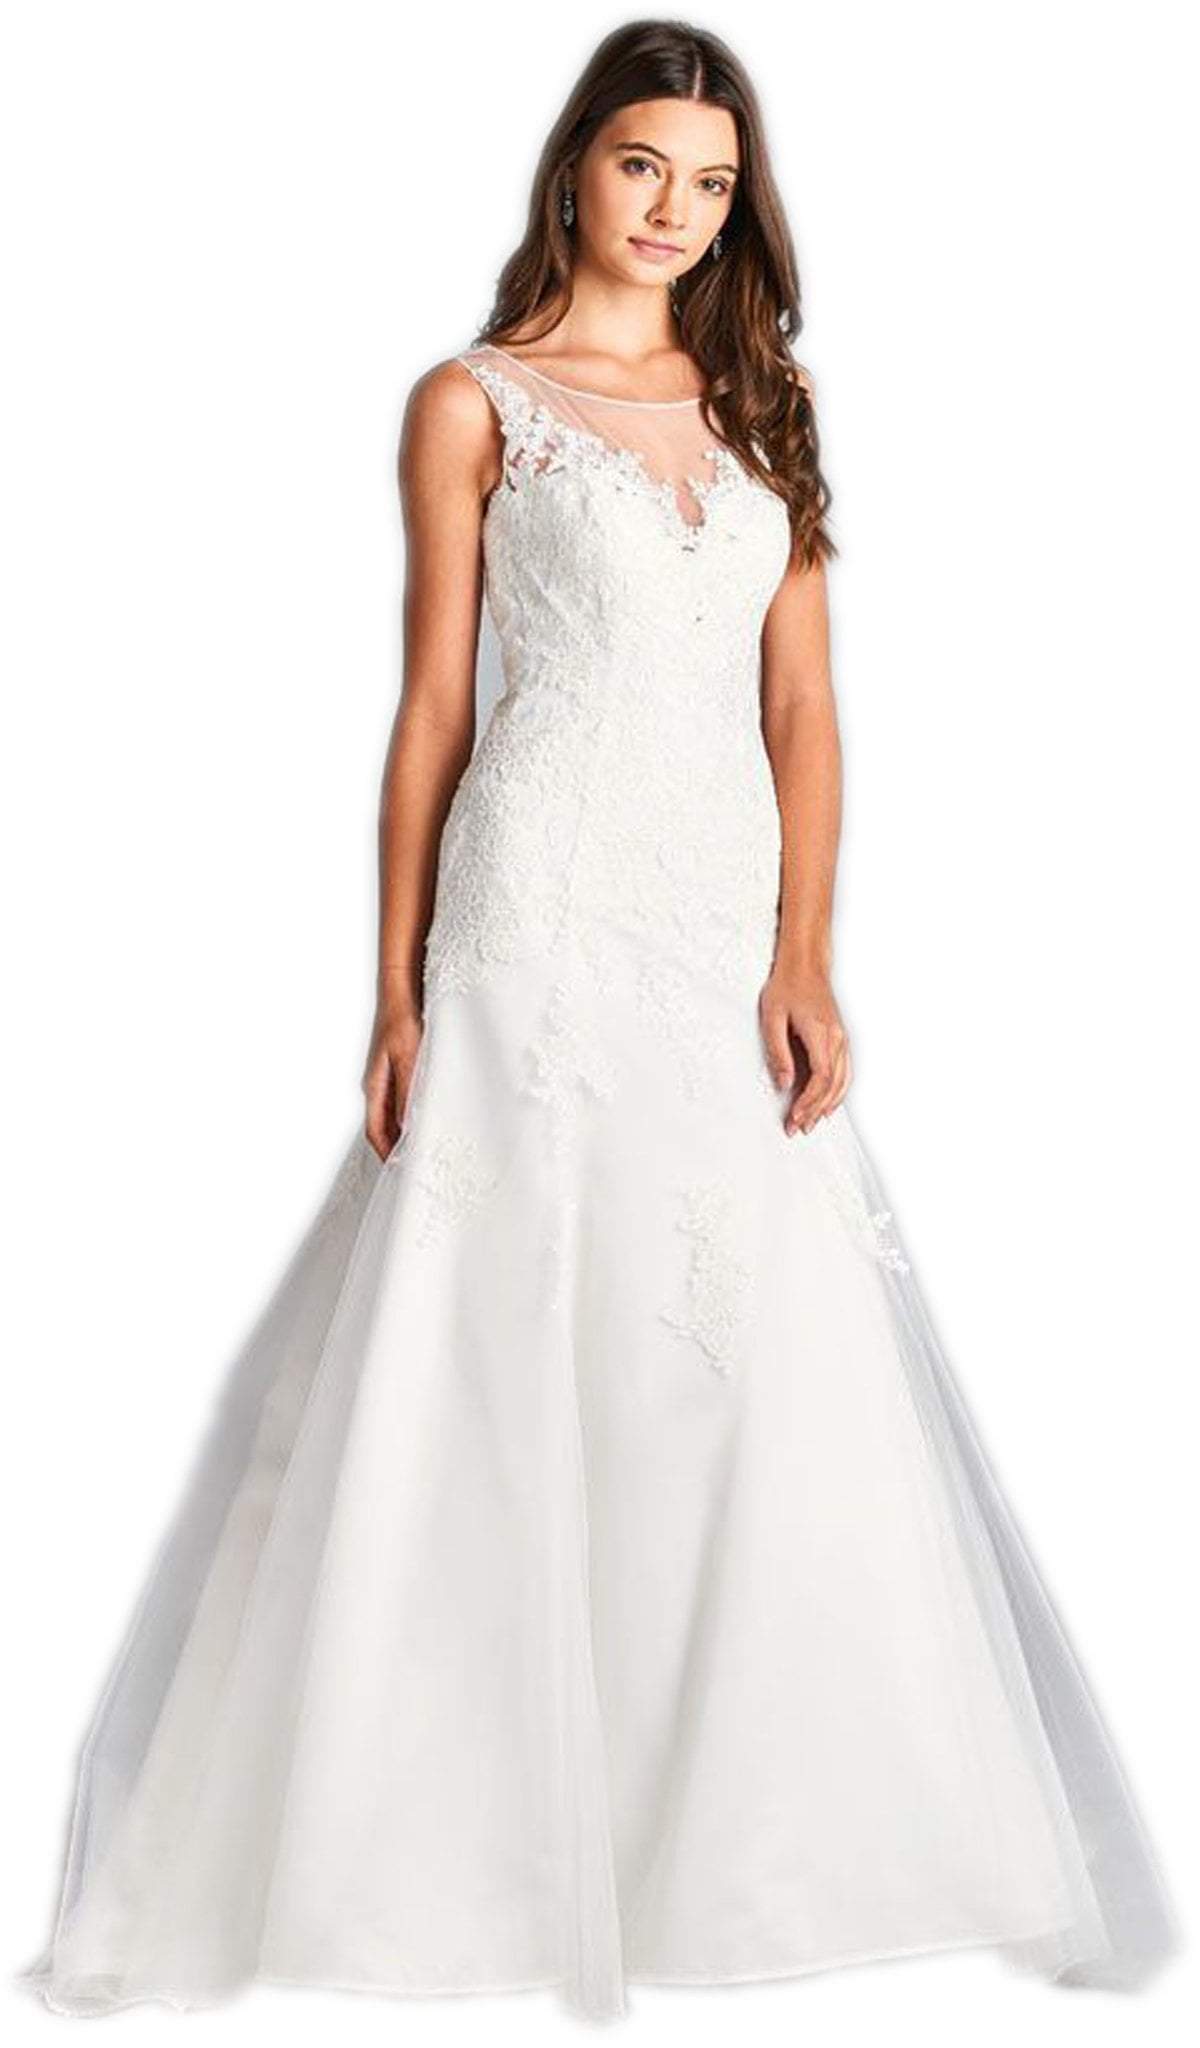 Image of Aspeed Design - Lace Applique A-line Wedding Gown